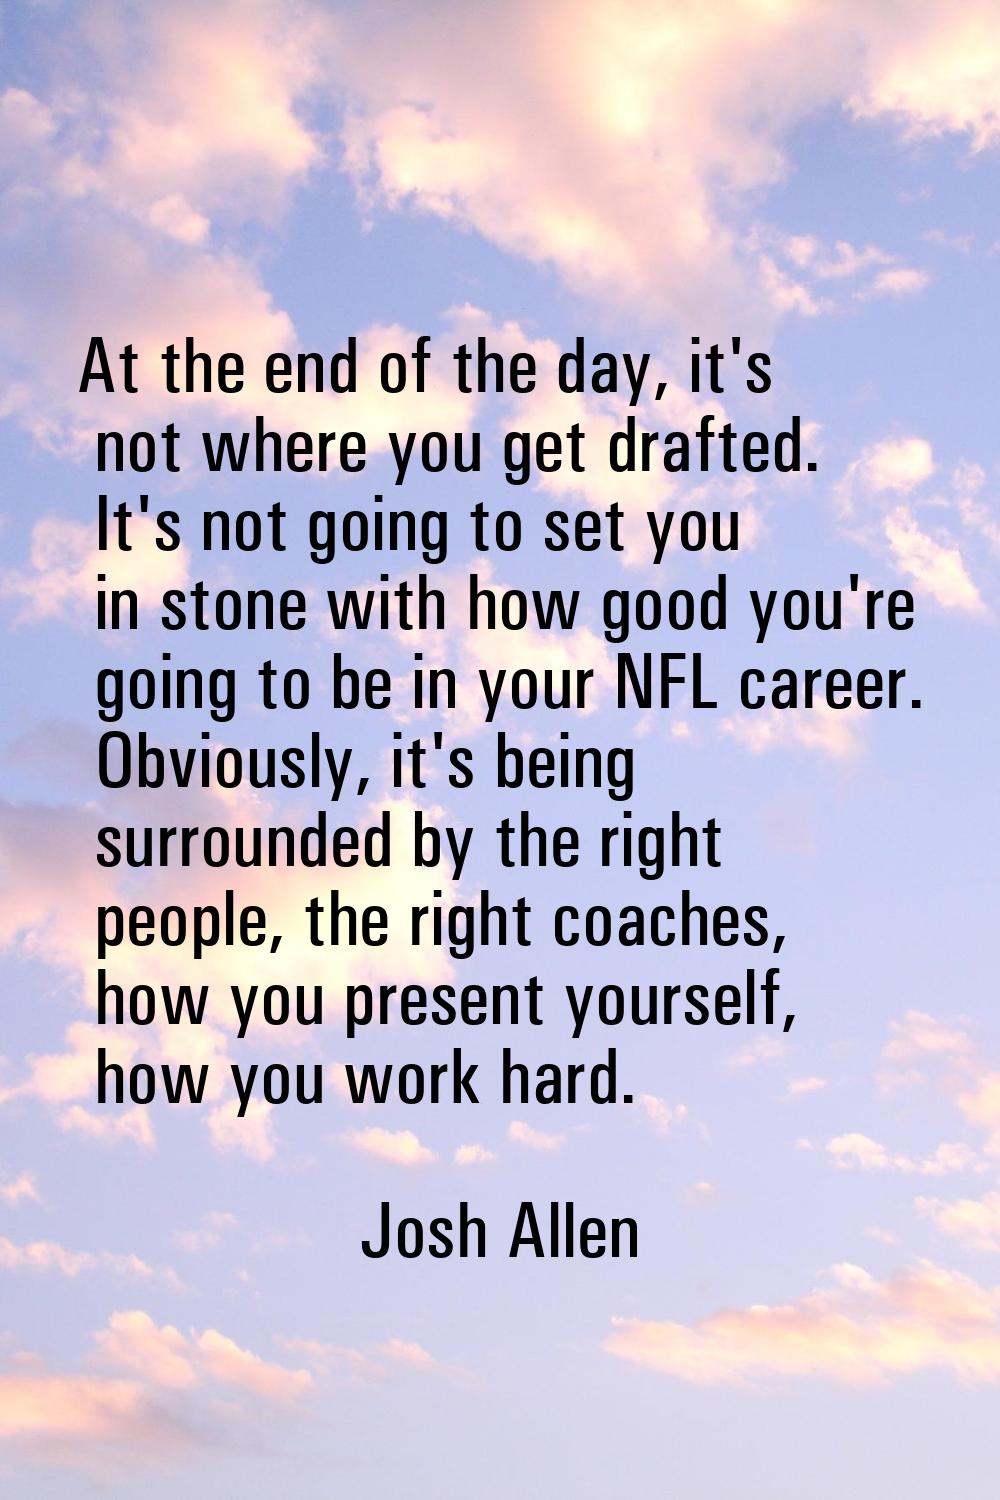 At the end of the day, it's not where you get drafted. It's not going to set you in stone with how 